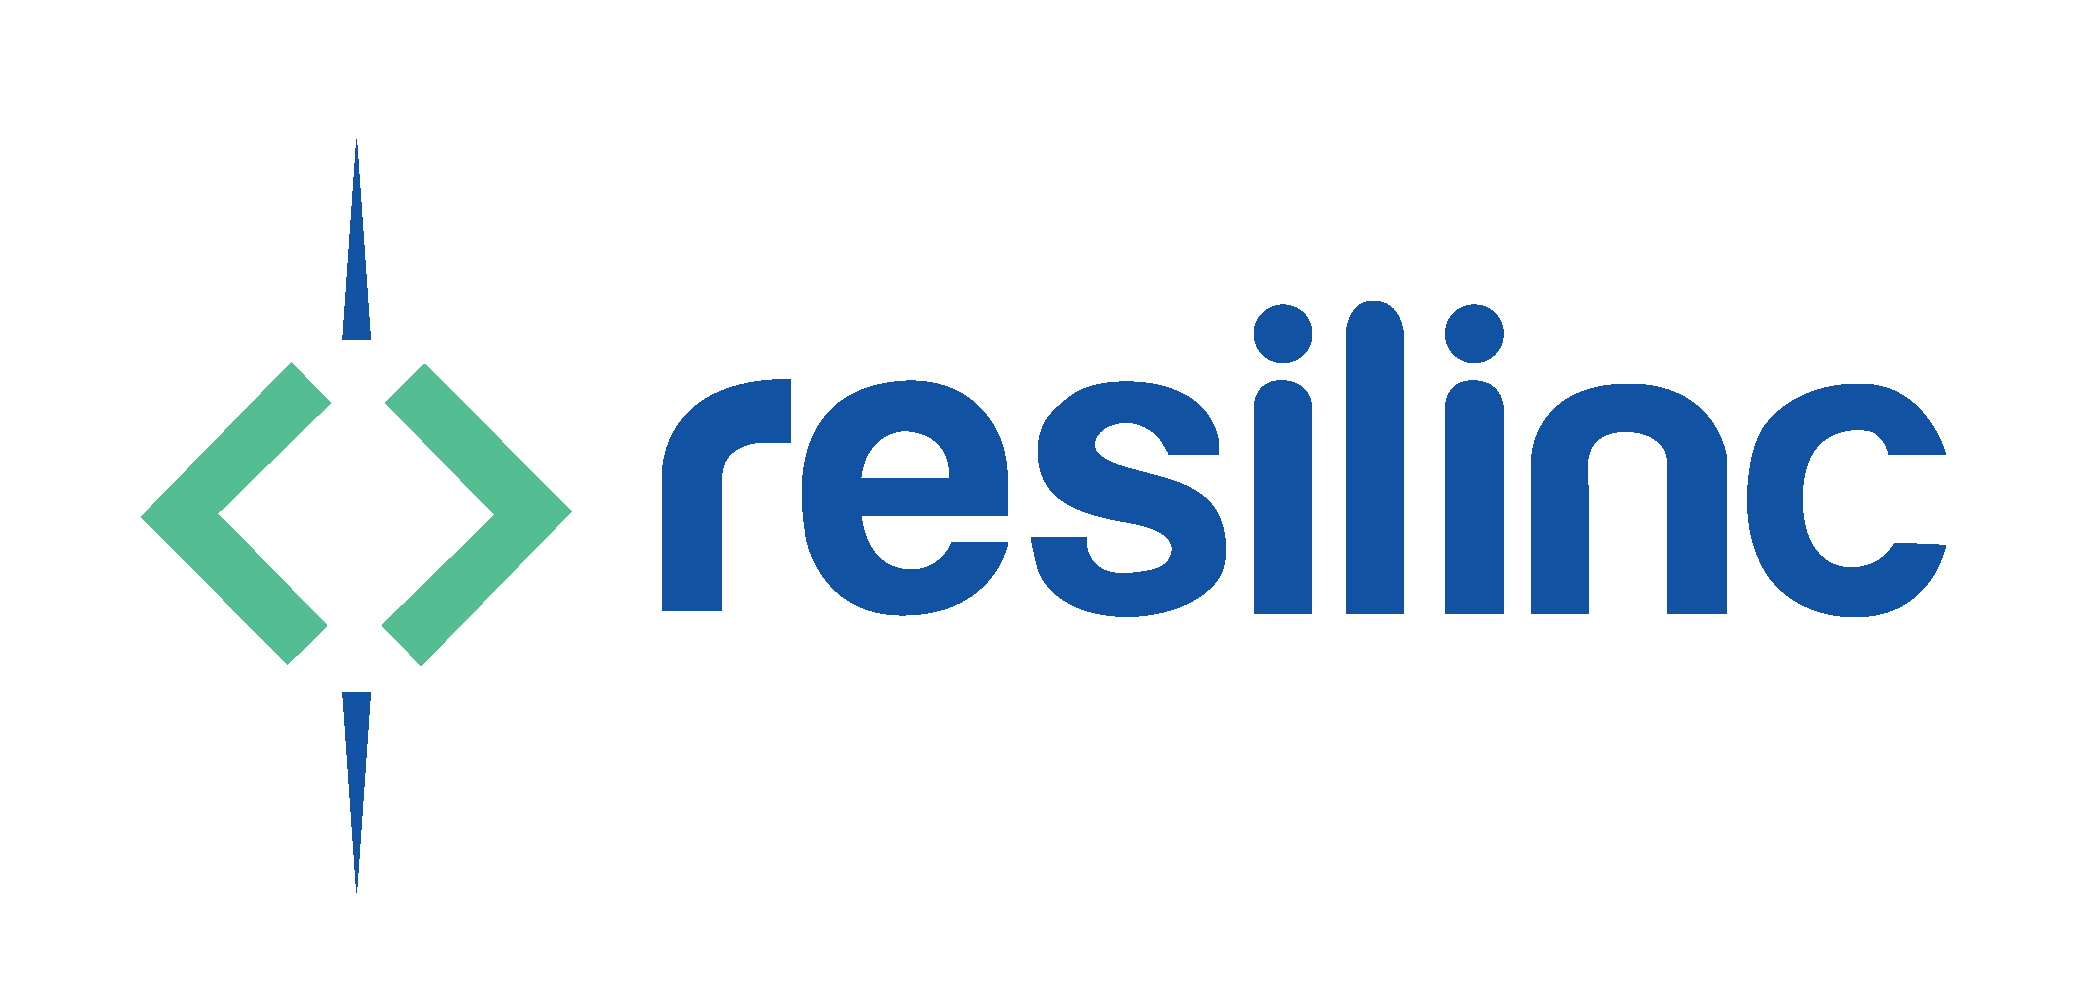 Resilinc CEO Honored